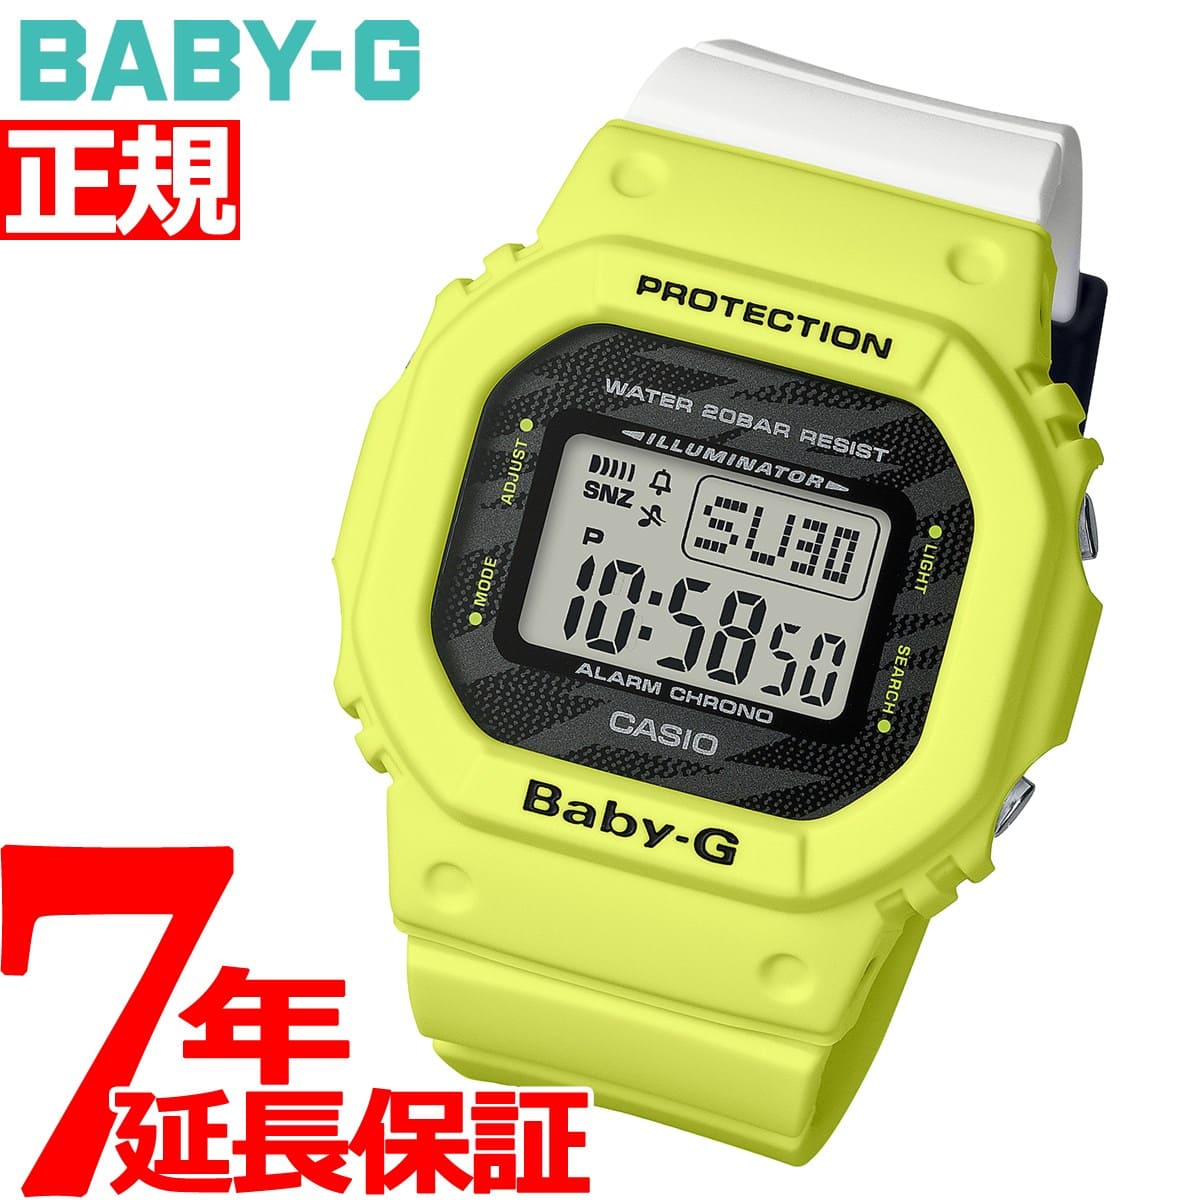 New]Casio Baby G Ladies Watch Yellow BGD-560TG-9JF - BE FORWARD Store